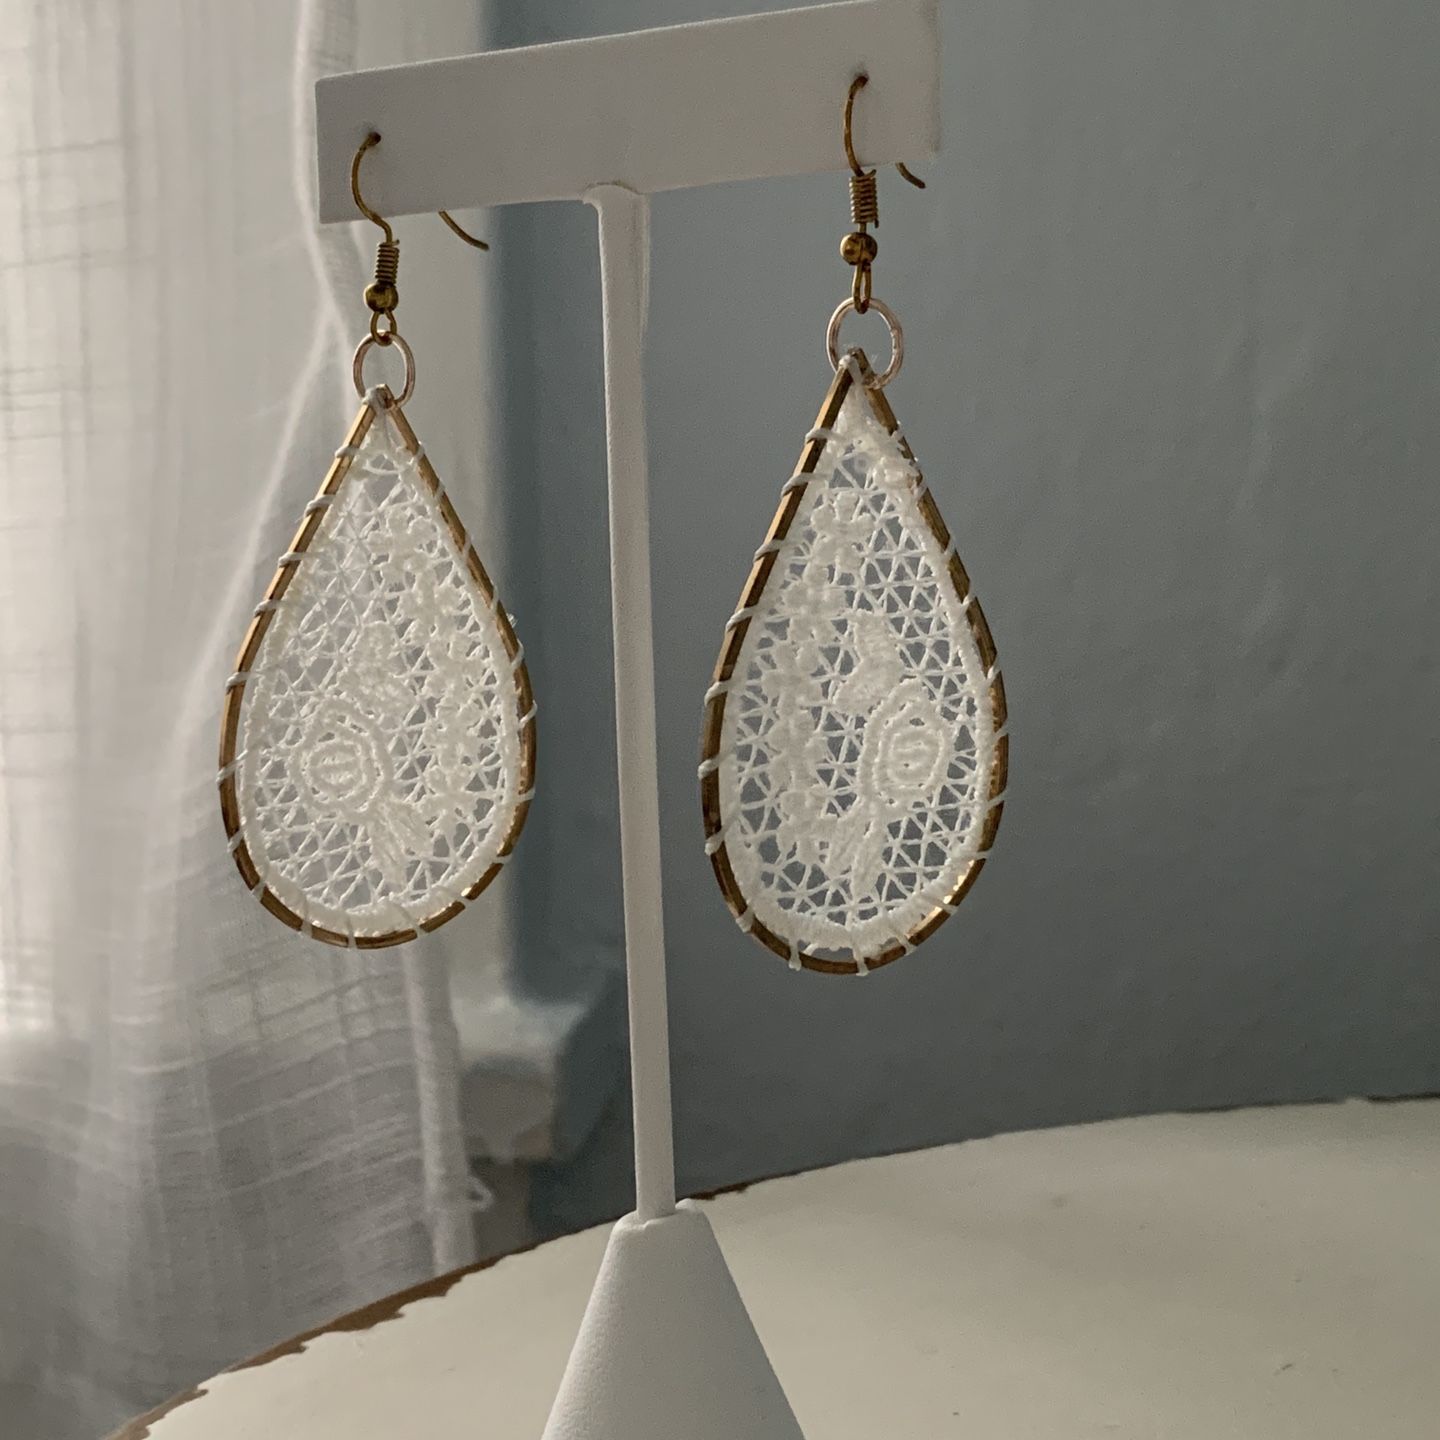 Back In stock!! Light As A Feather Lace Earrings